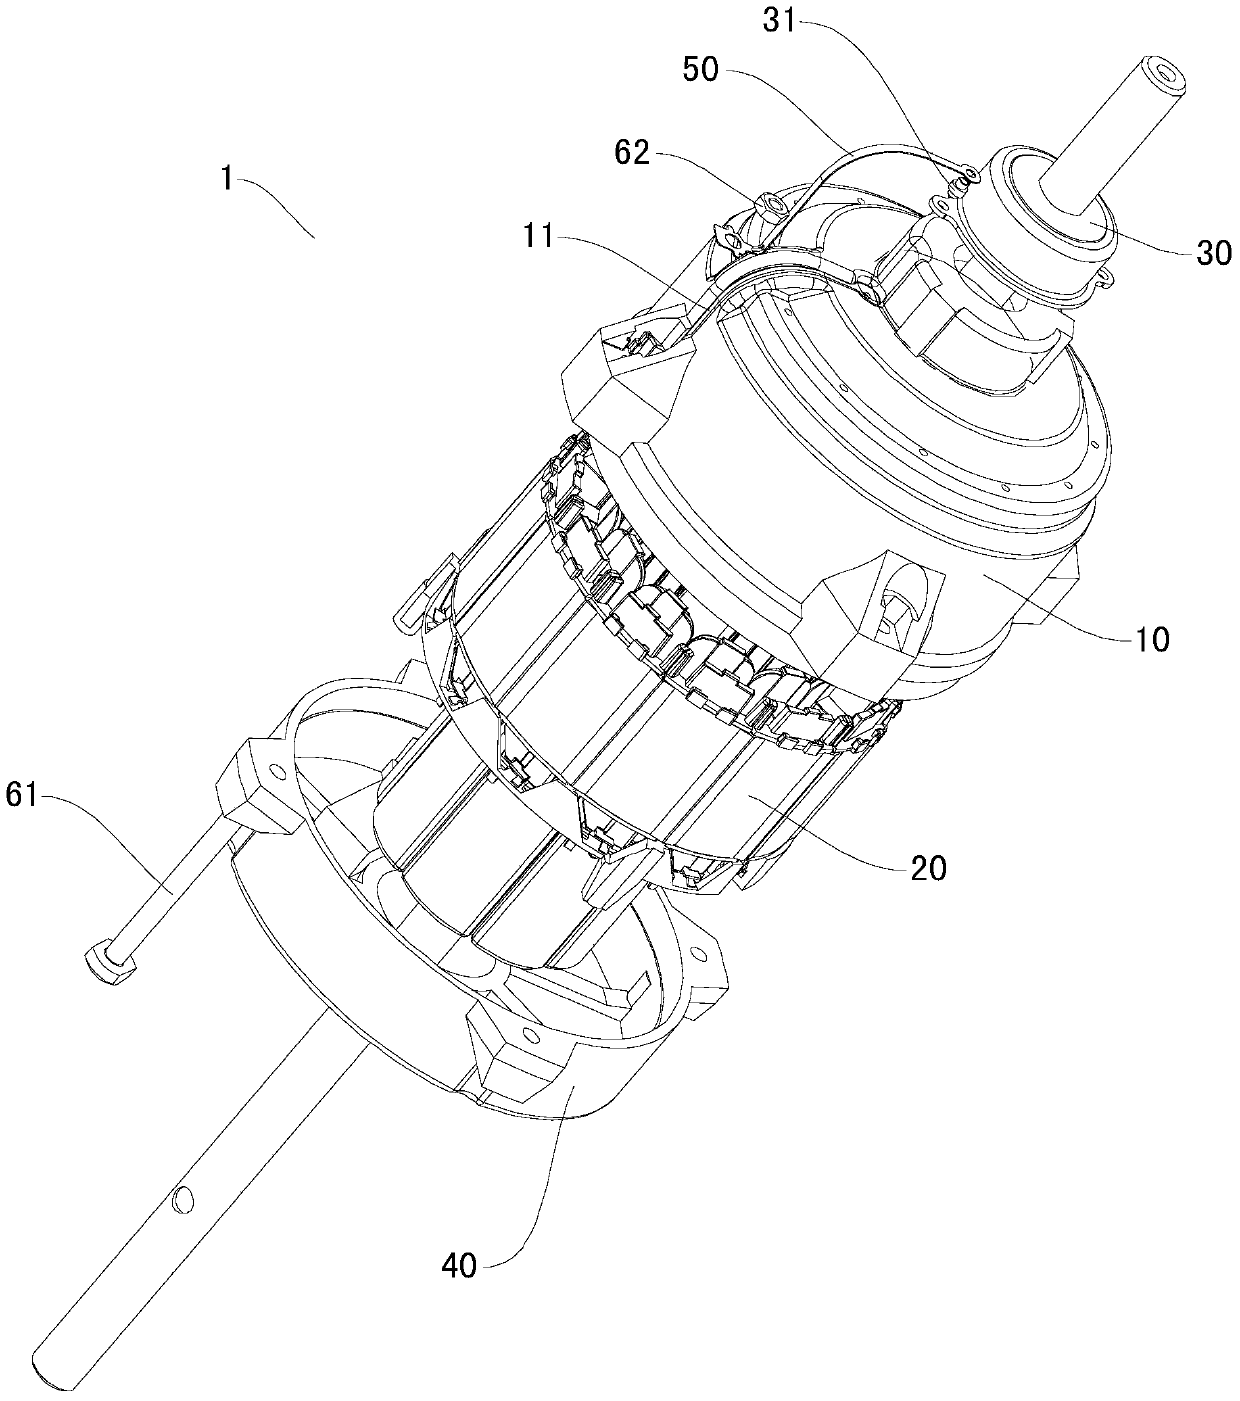 Motor and housing assembly for motor